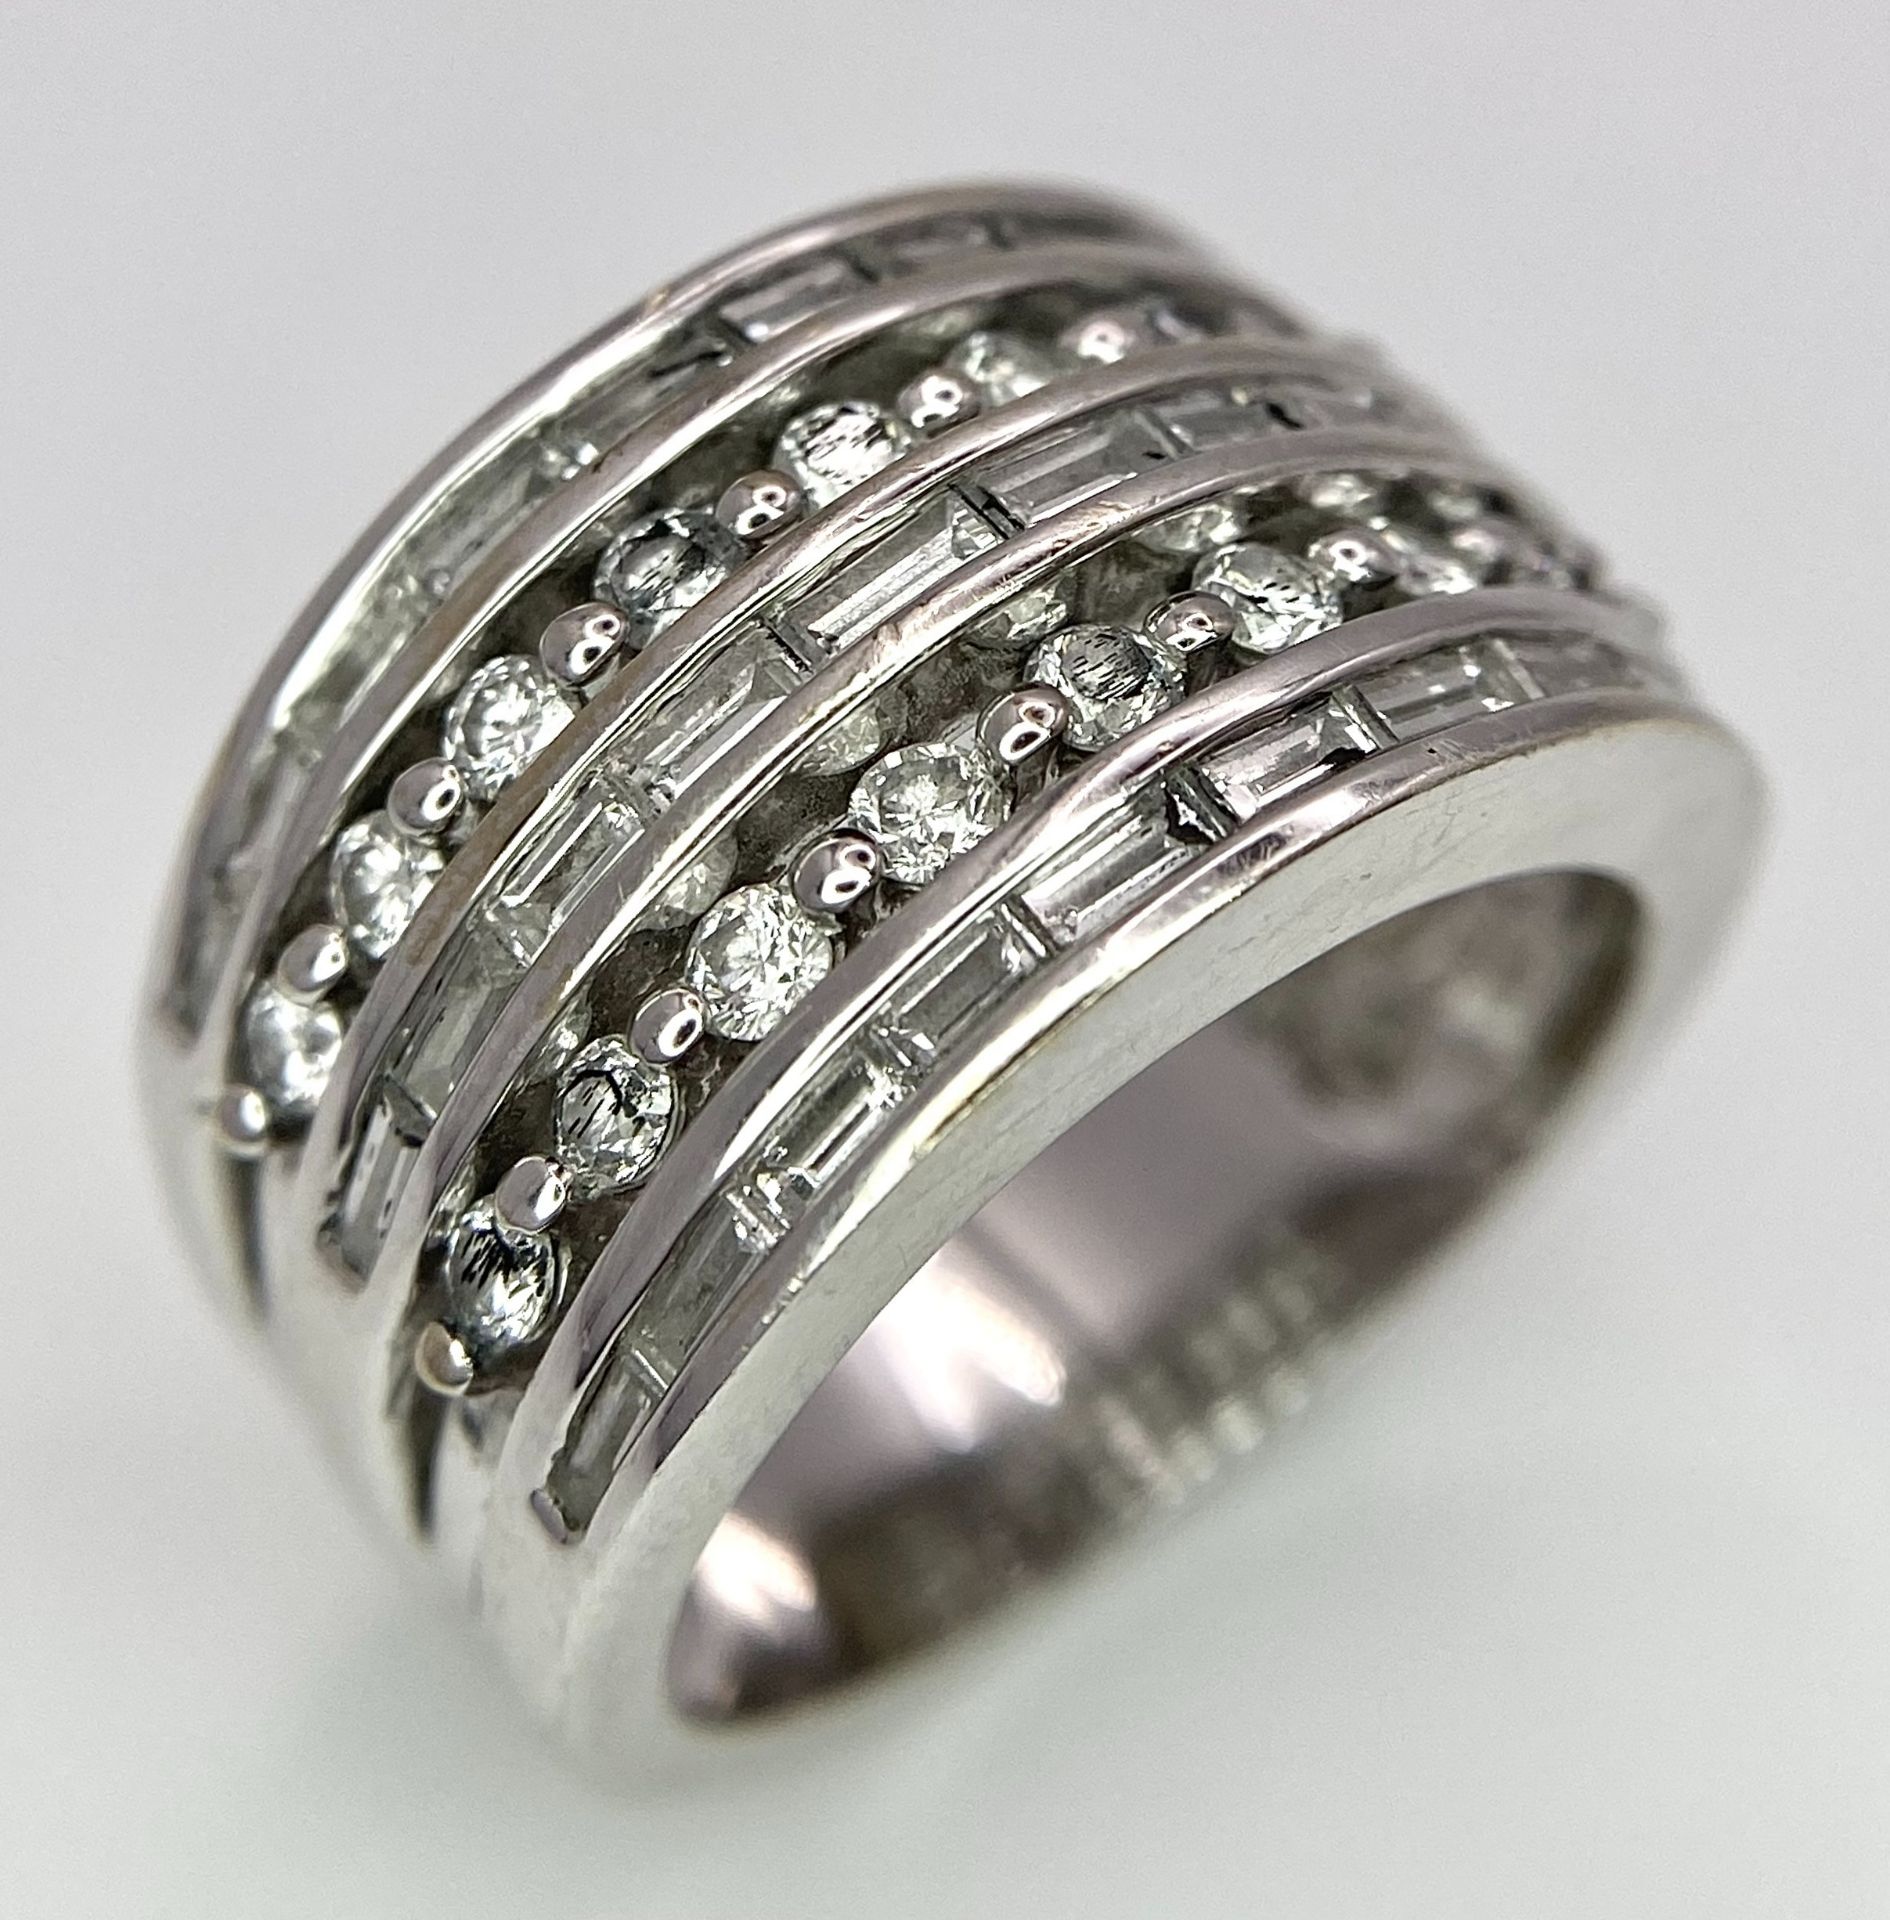 AN 18K WHITE GOLD 5 ROW DIAMOND RING. MIXTURE OF ROUND BRILLIANT CUTS AND BAGUETTE CUT DIAMONDS. - Image 3 of 9